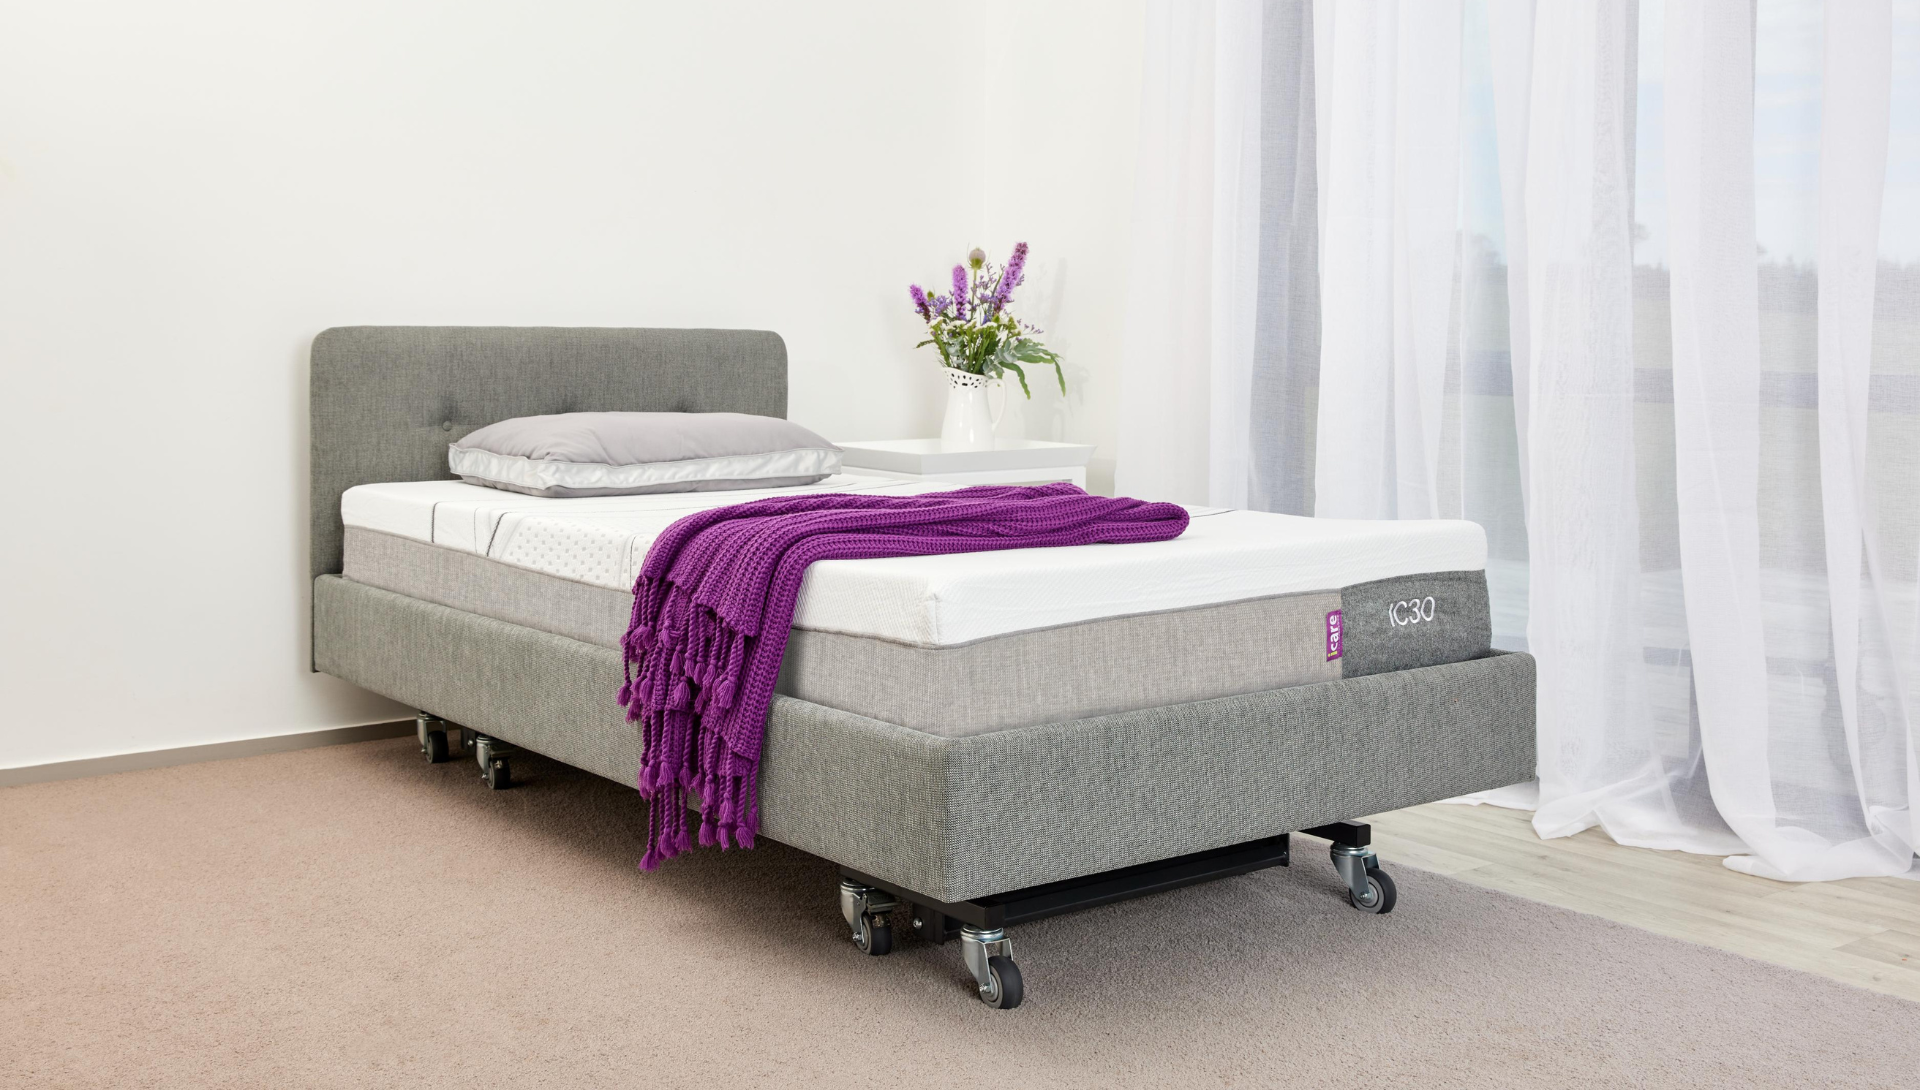 home care bed, profile bed, hospital bed, care bed